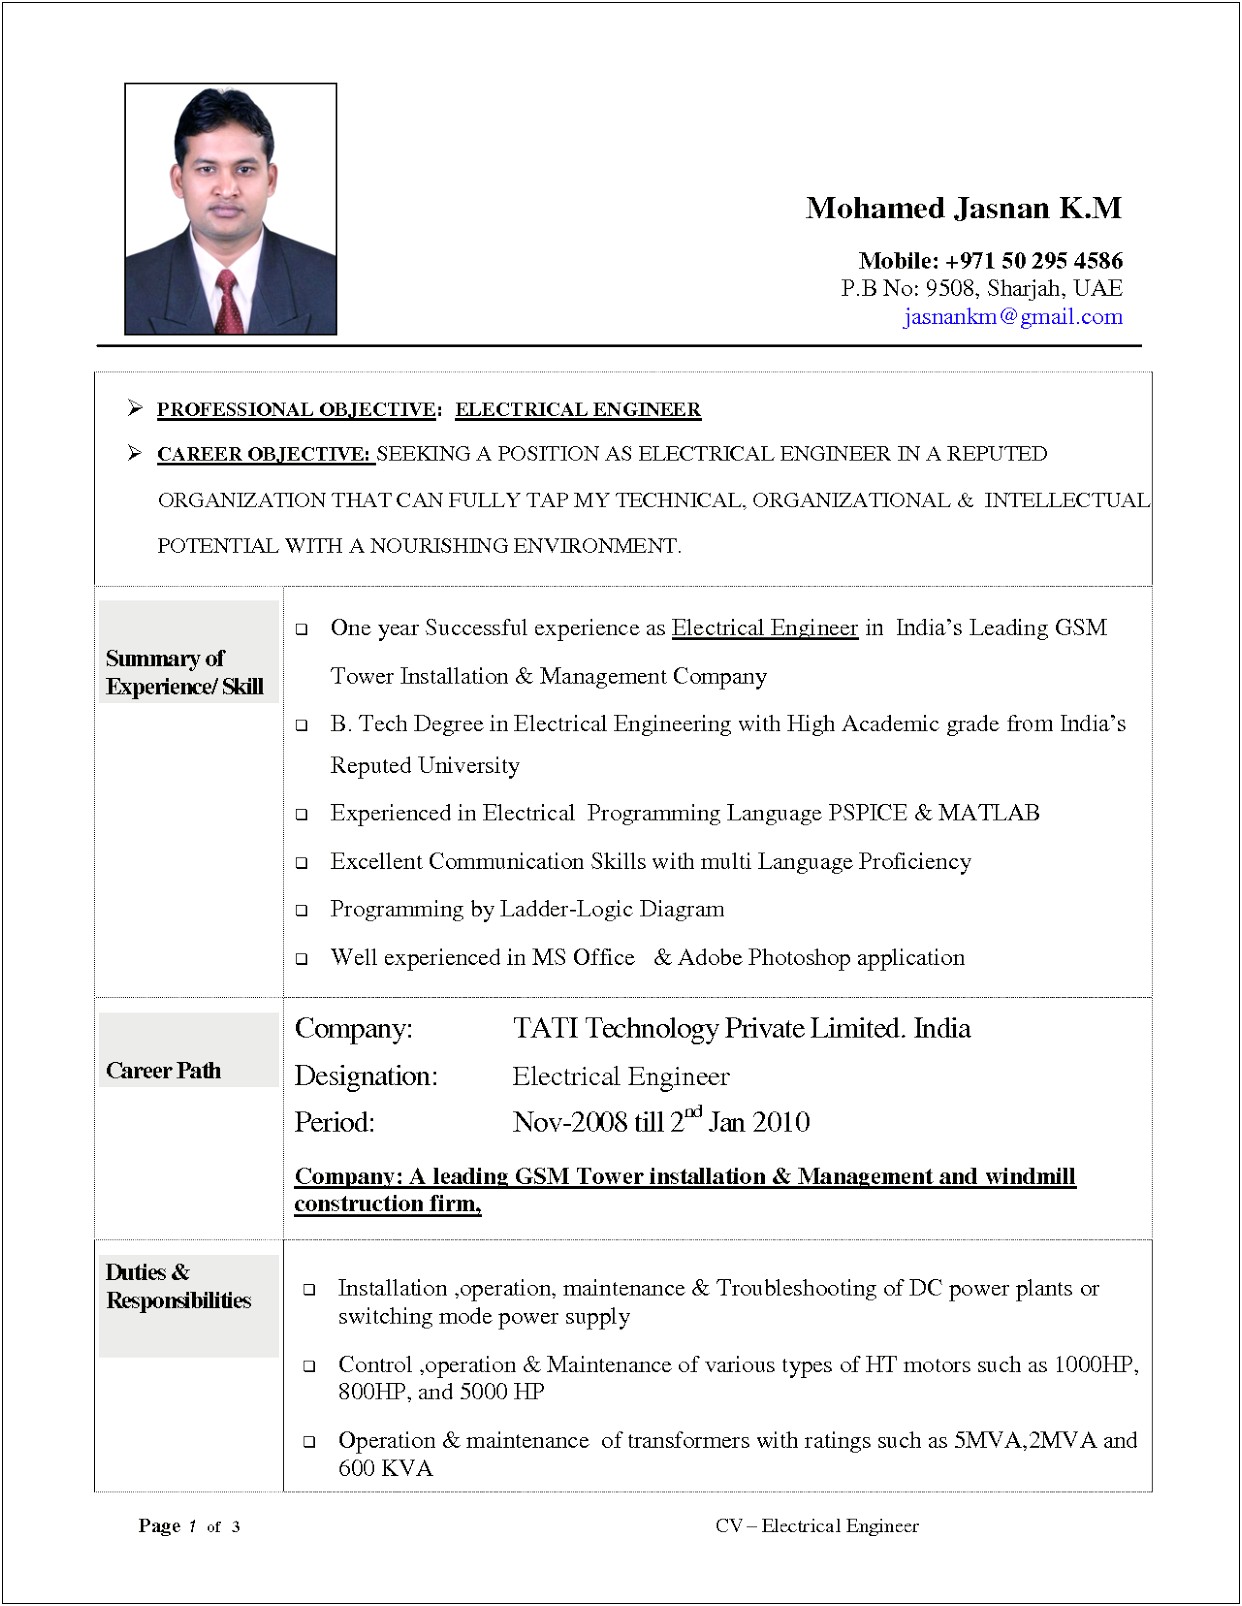 Resume Objective Statement For Electrical Engineering